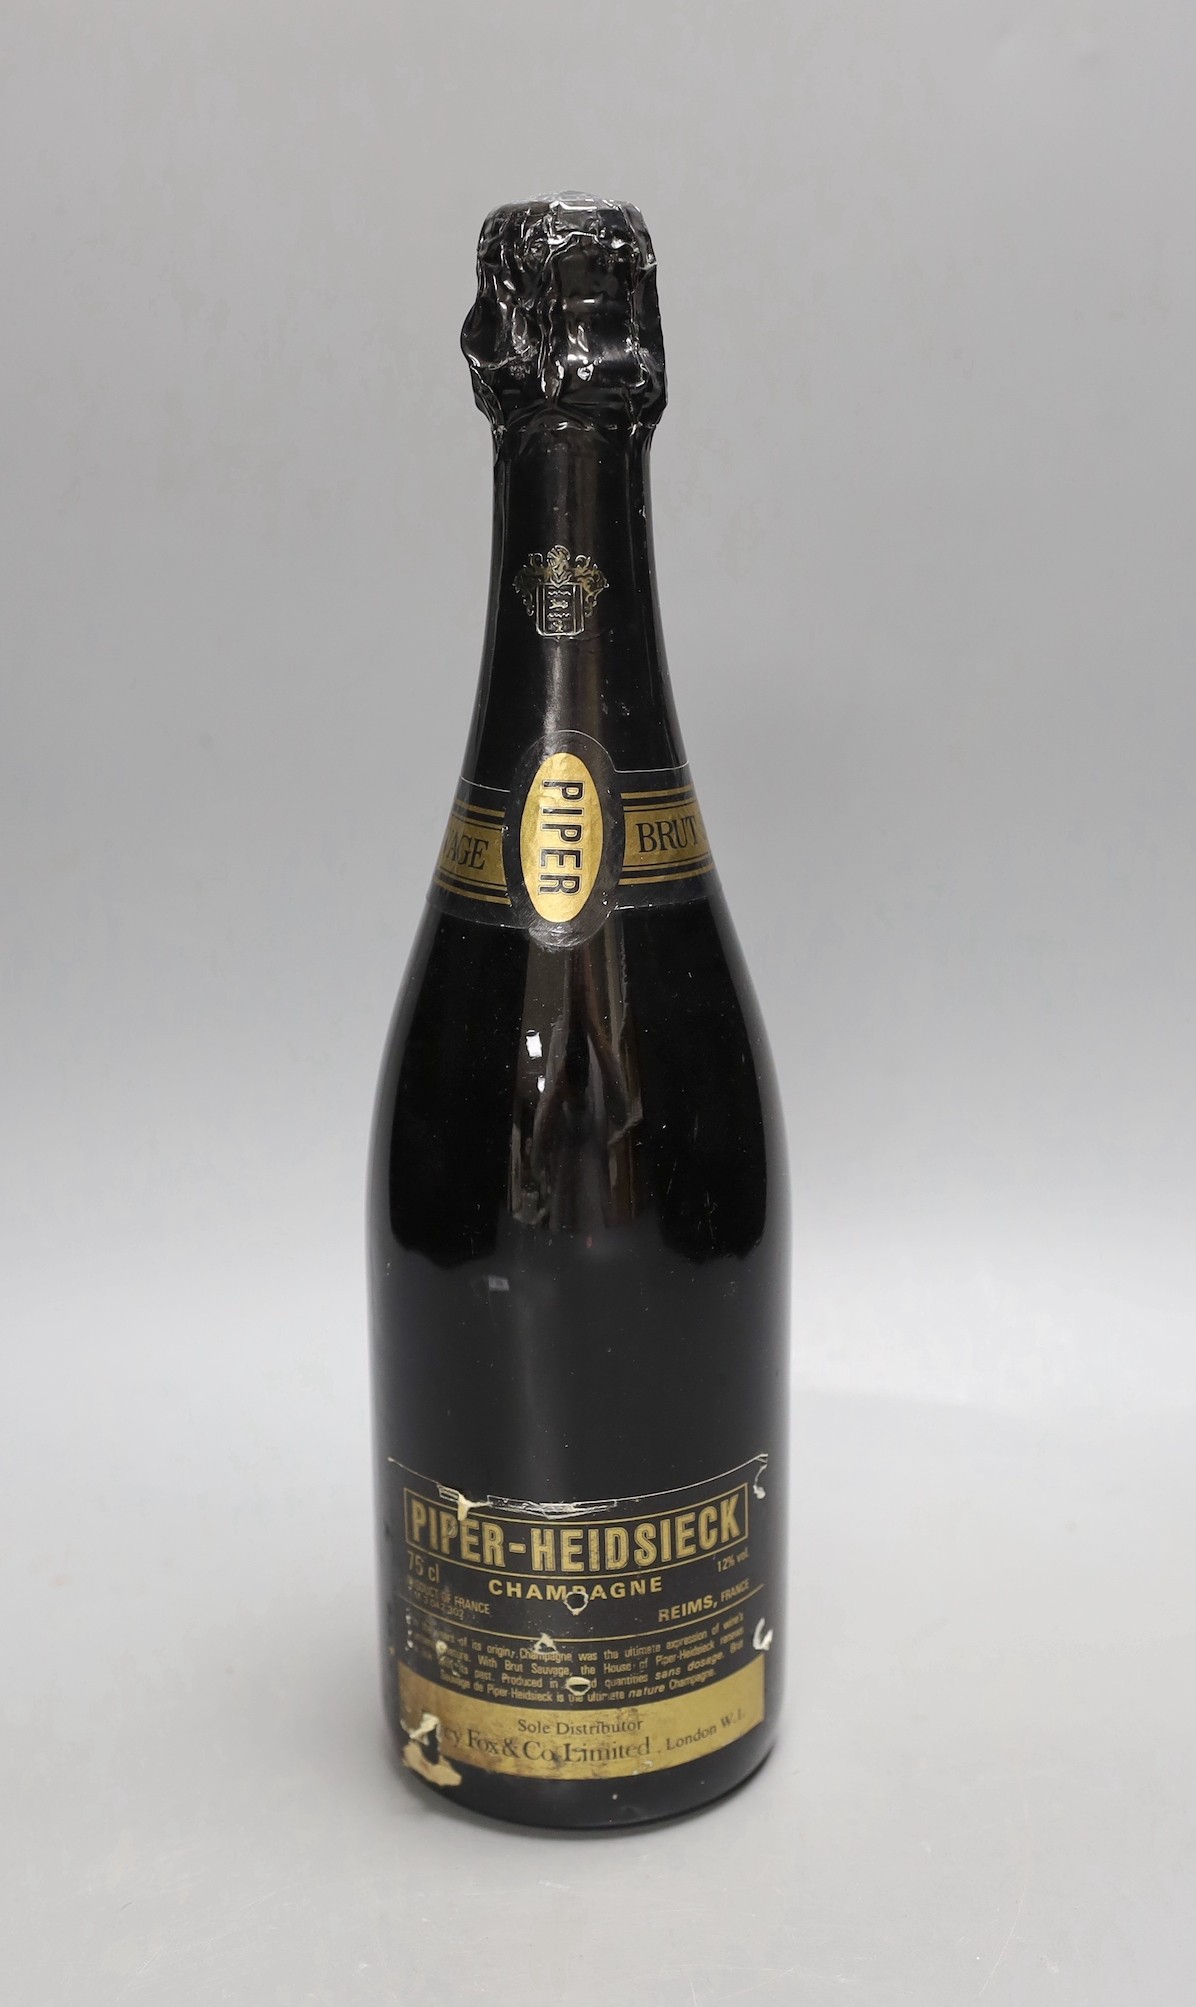 One bottle of Piper-Heidsieck Sauvage champagne